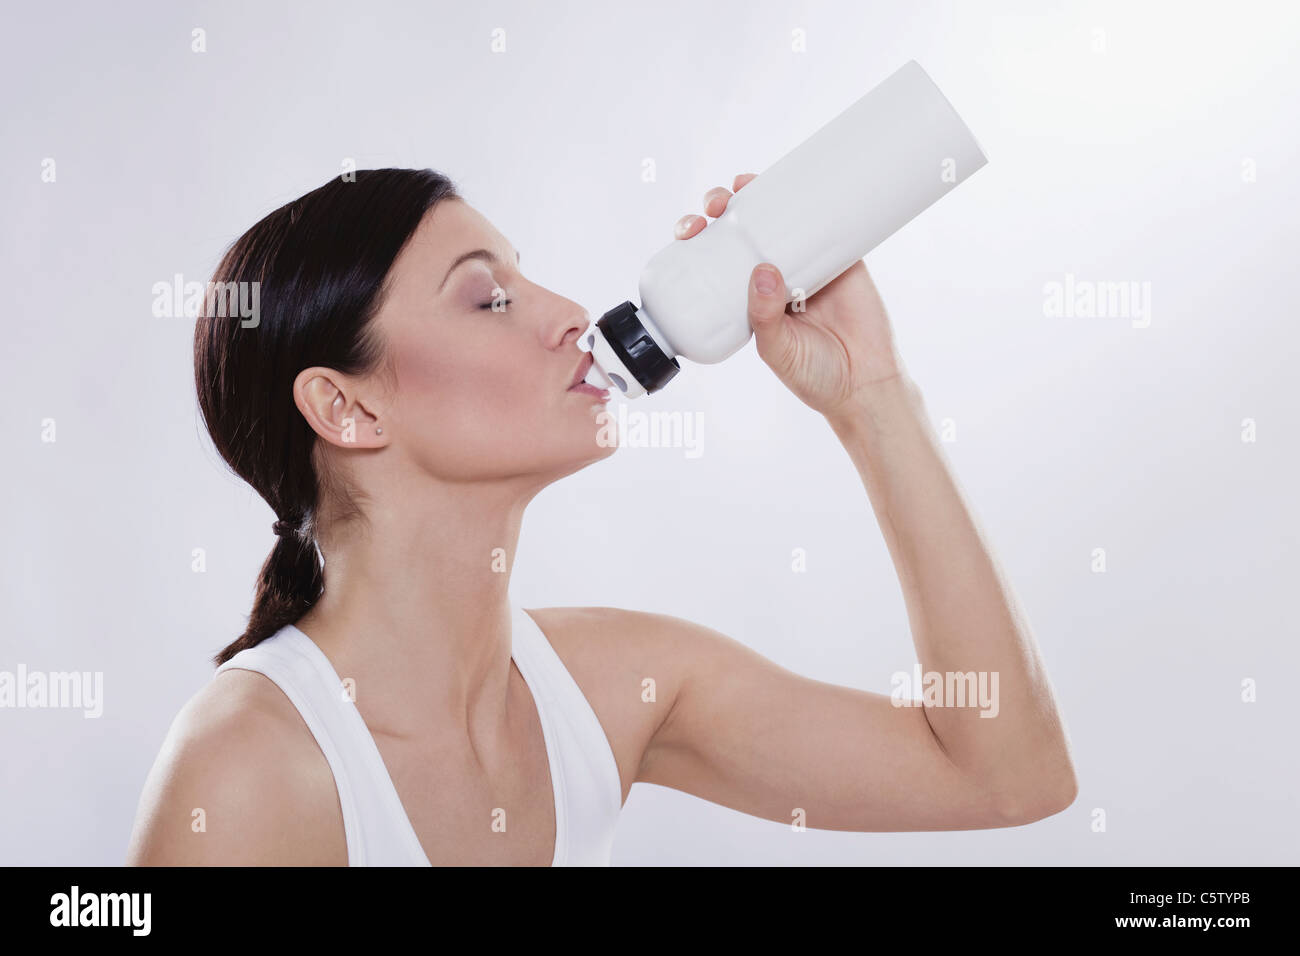 Mid adult woman drinking from water bottle against white background Stock Photo